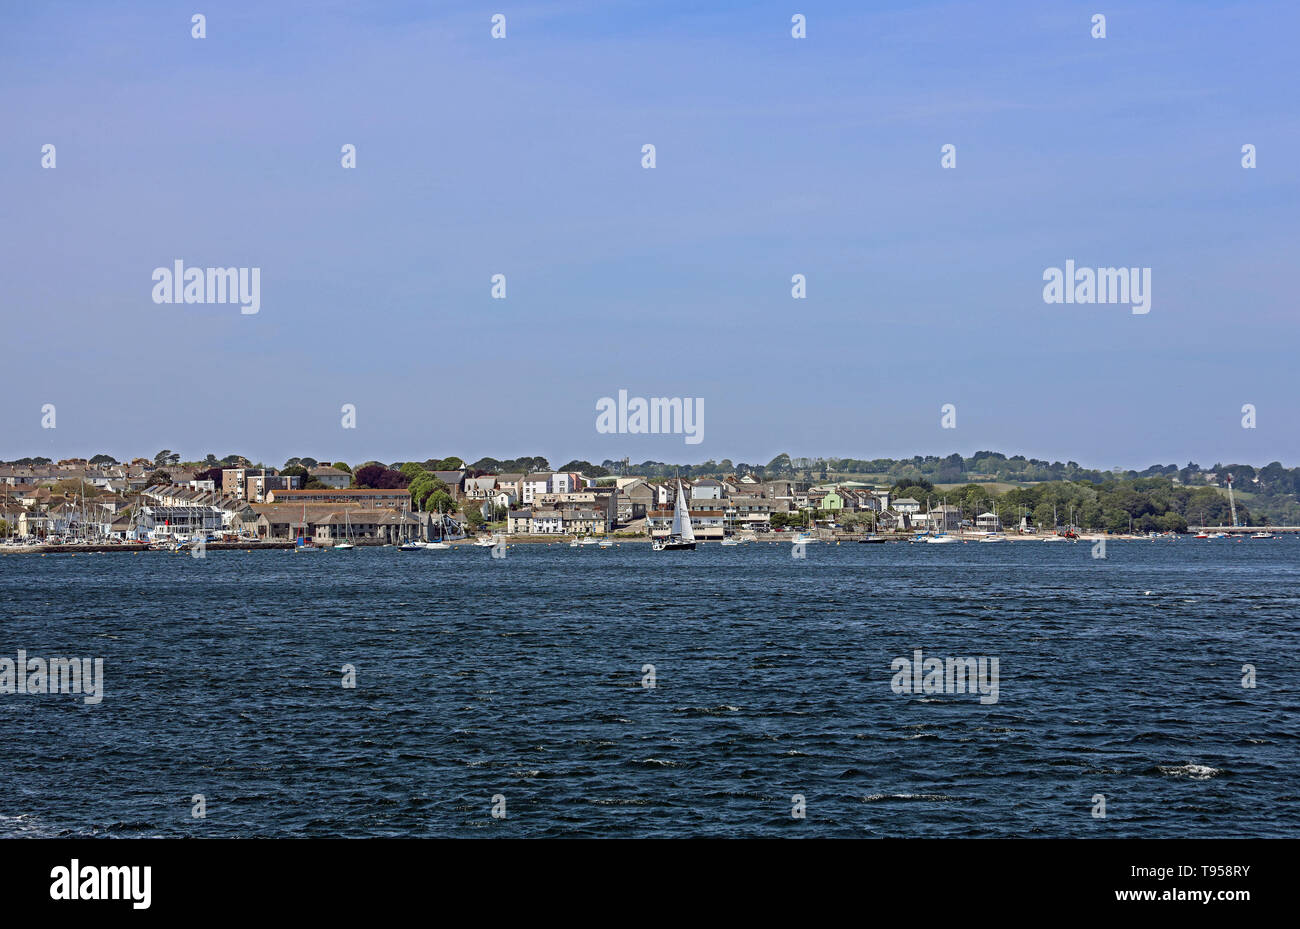 Torpoint from the River Tamar, Long shot. Stock Photo